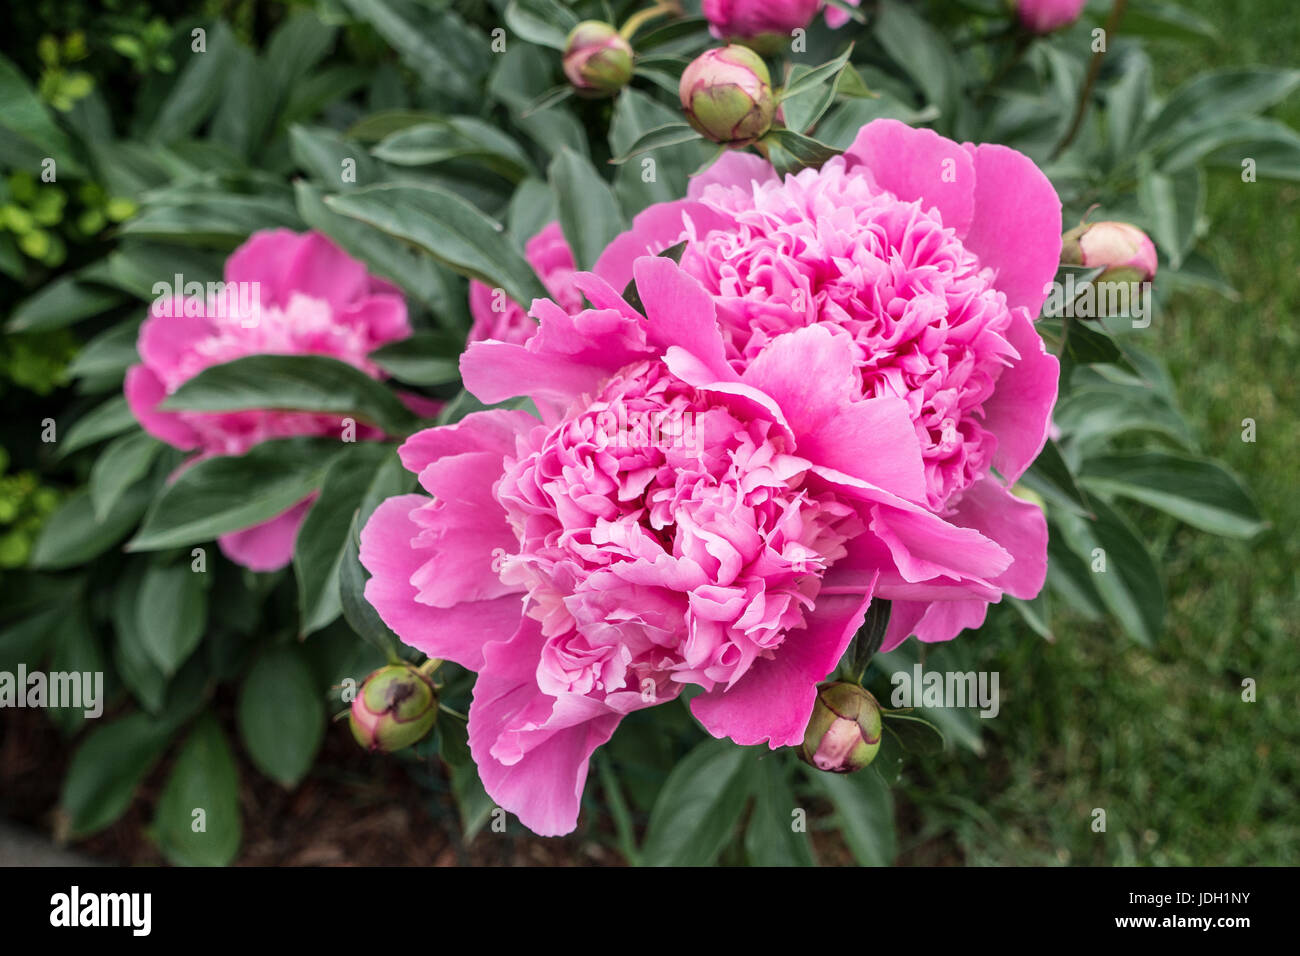 pink flowers with green leaves around them Stock Photo